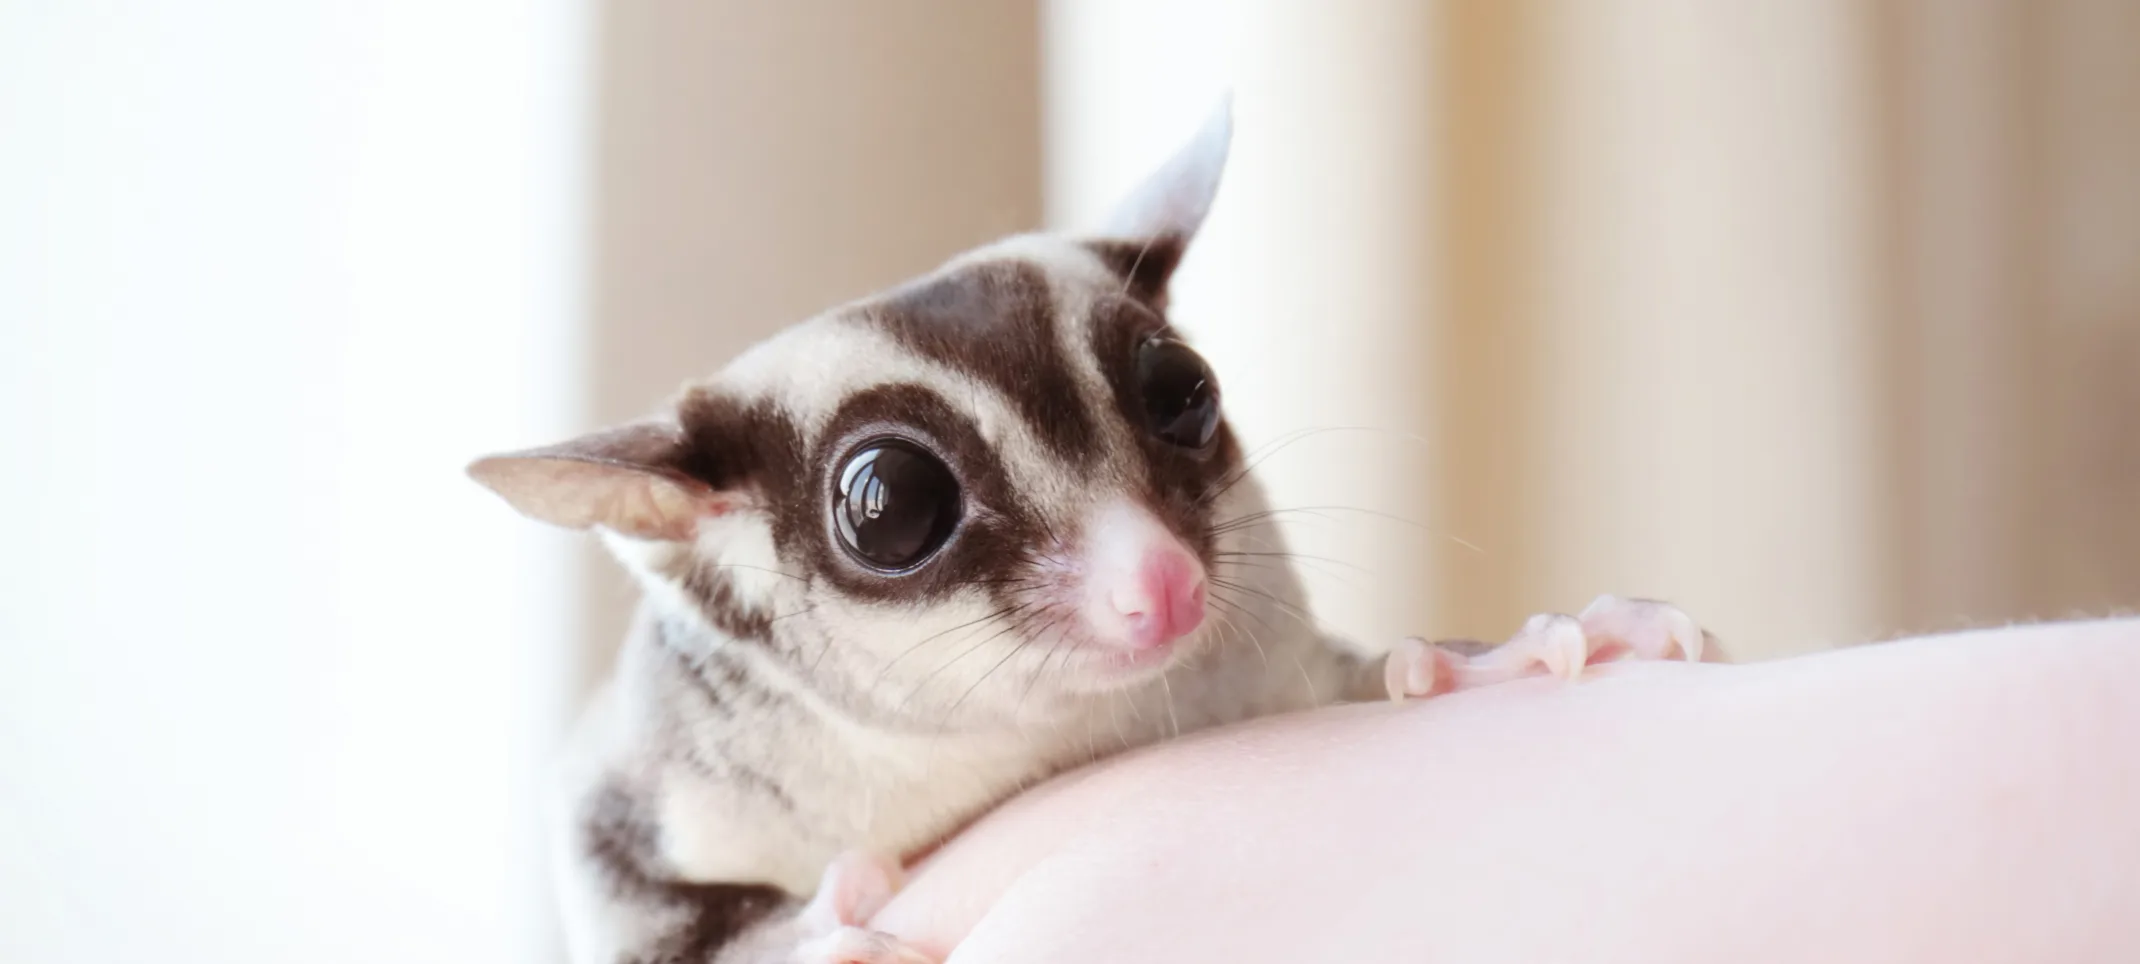 Sugar Glider sitting on a pink blanket on the back of a couch